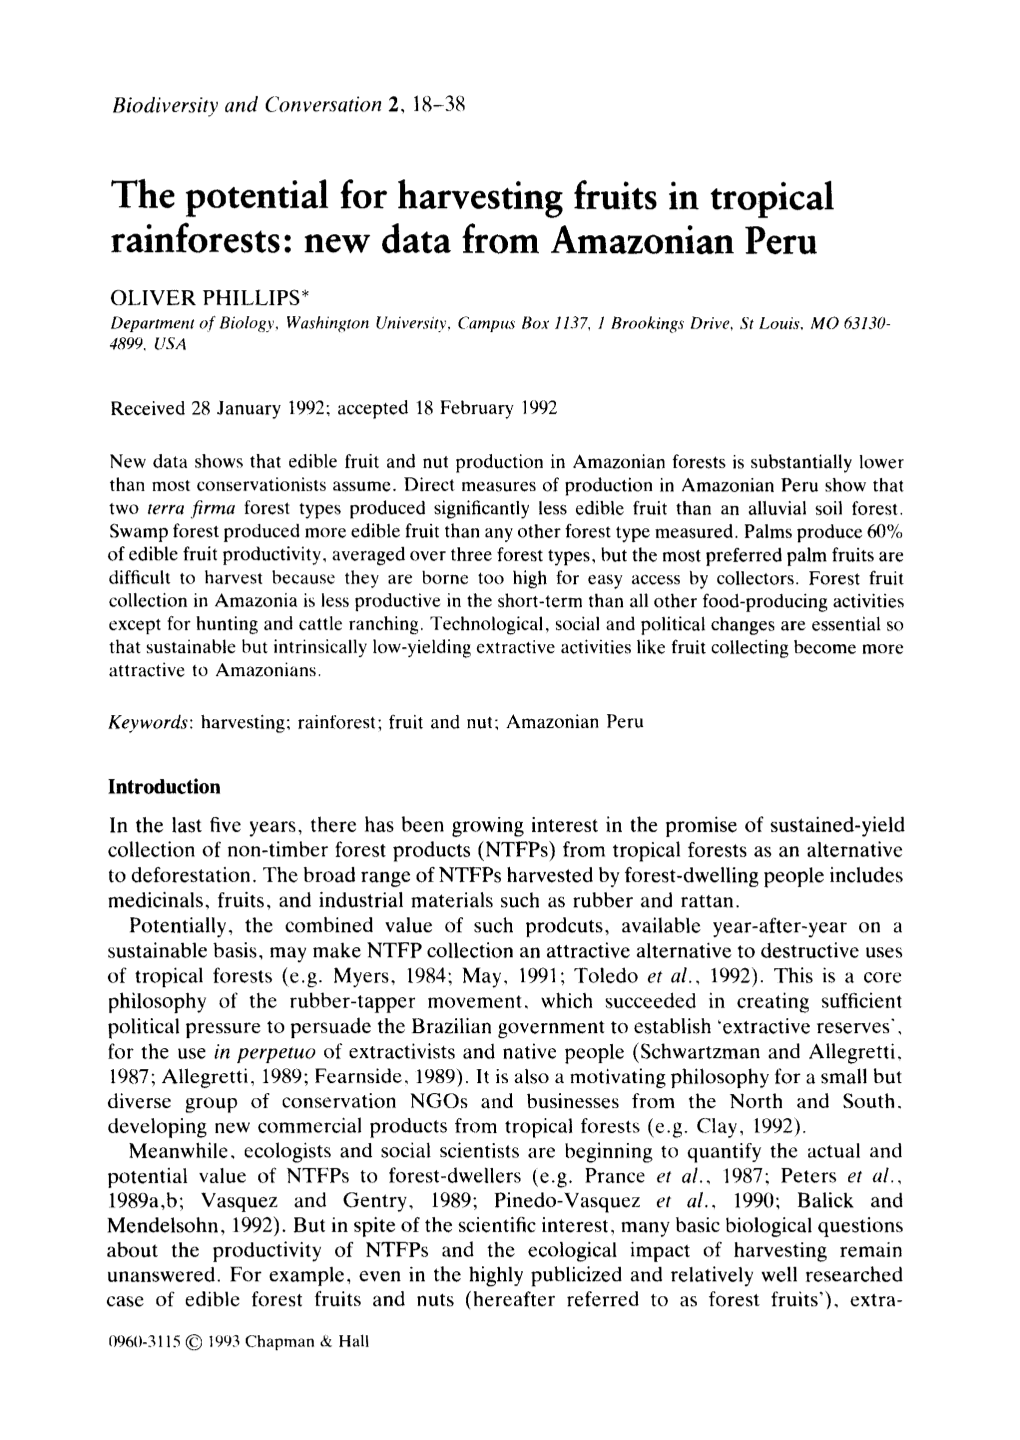 The Potential for Harvesting Fruits in Tropical Rainforests: New Data from Amazonian Peru